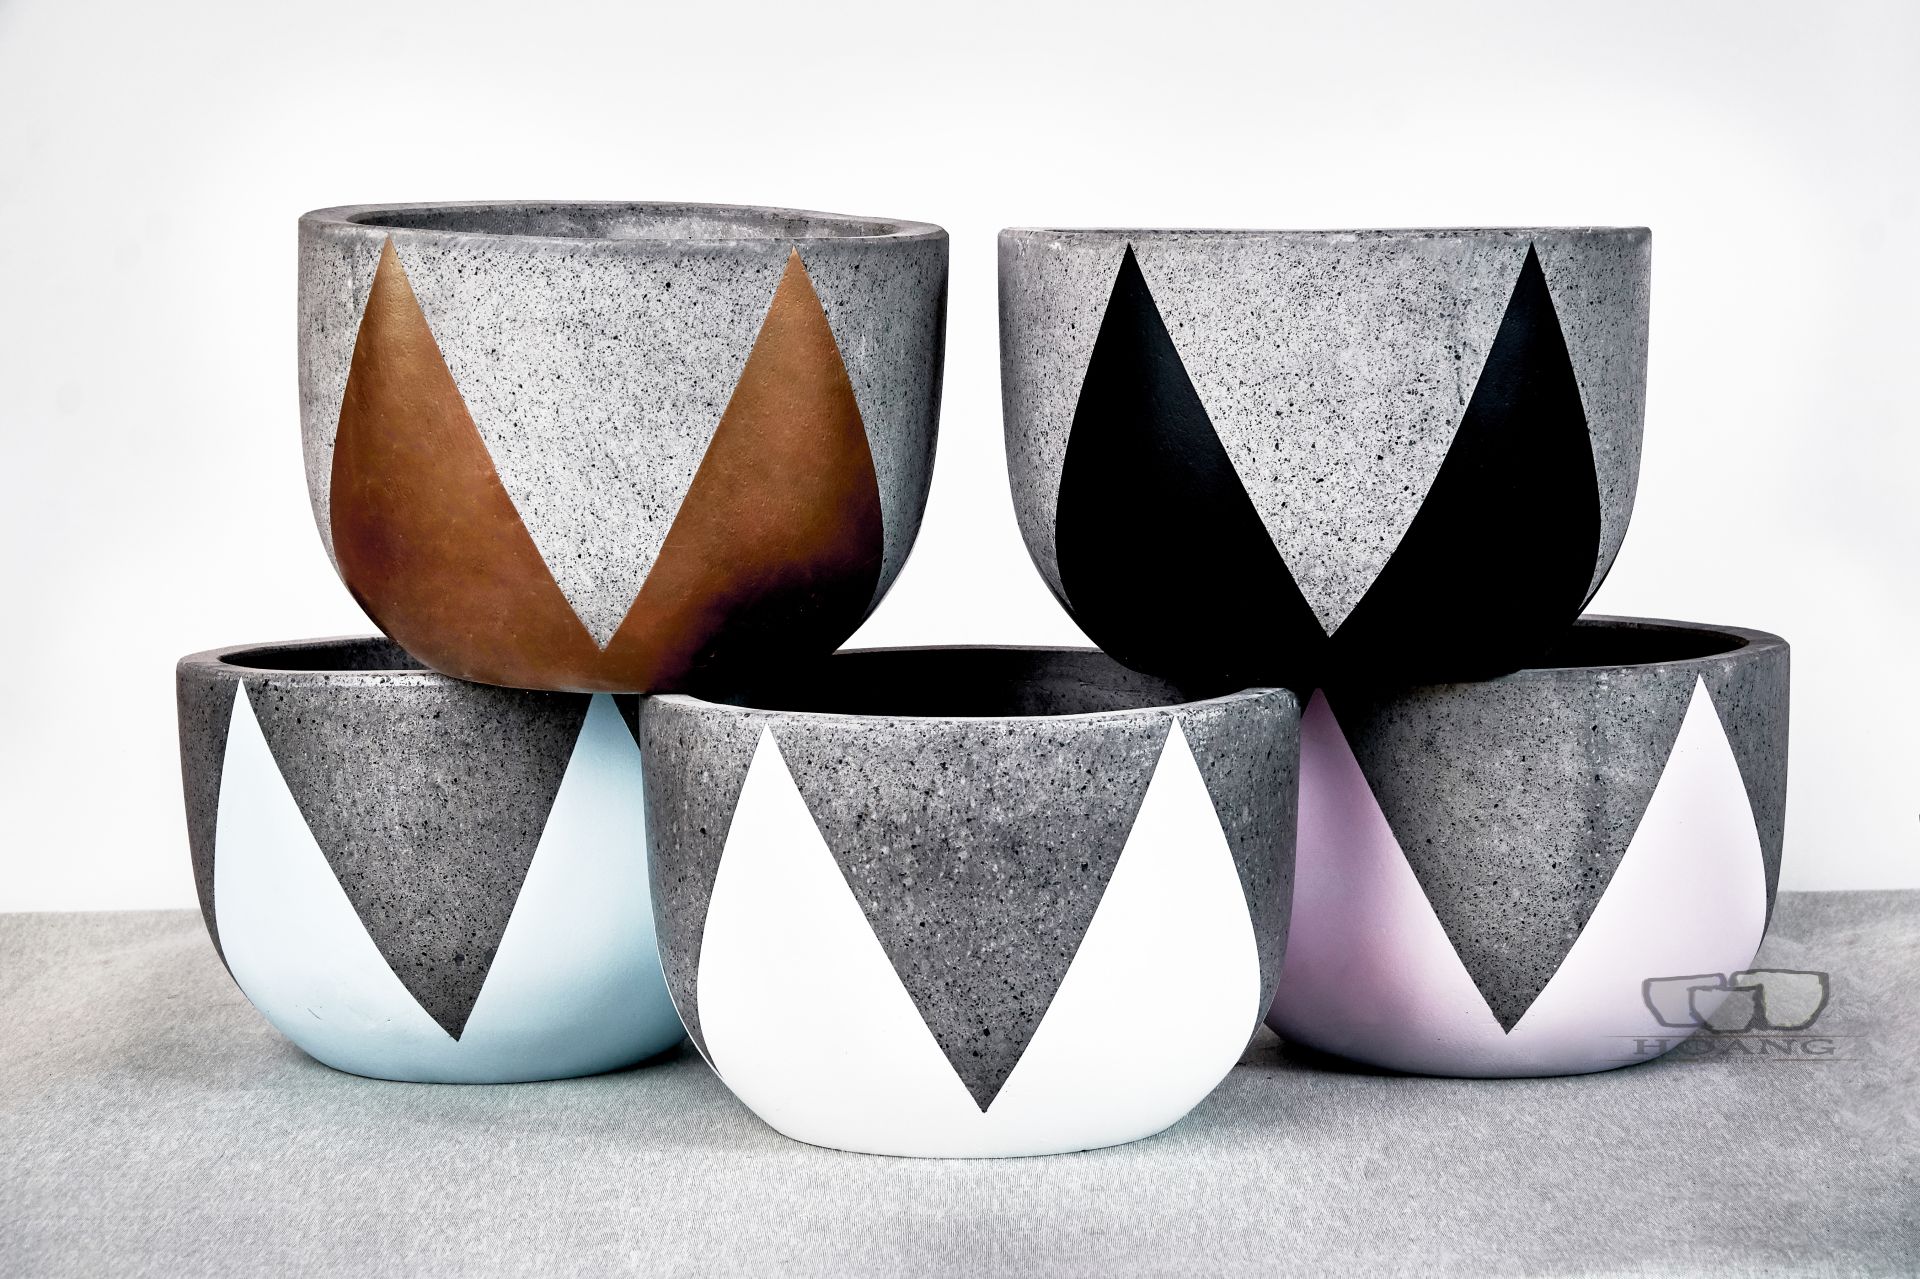 Cement pots are having a moment in interior and exterior design.